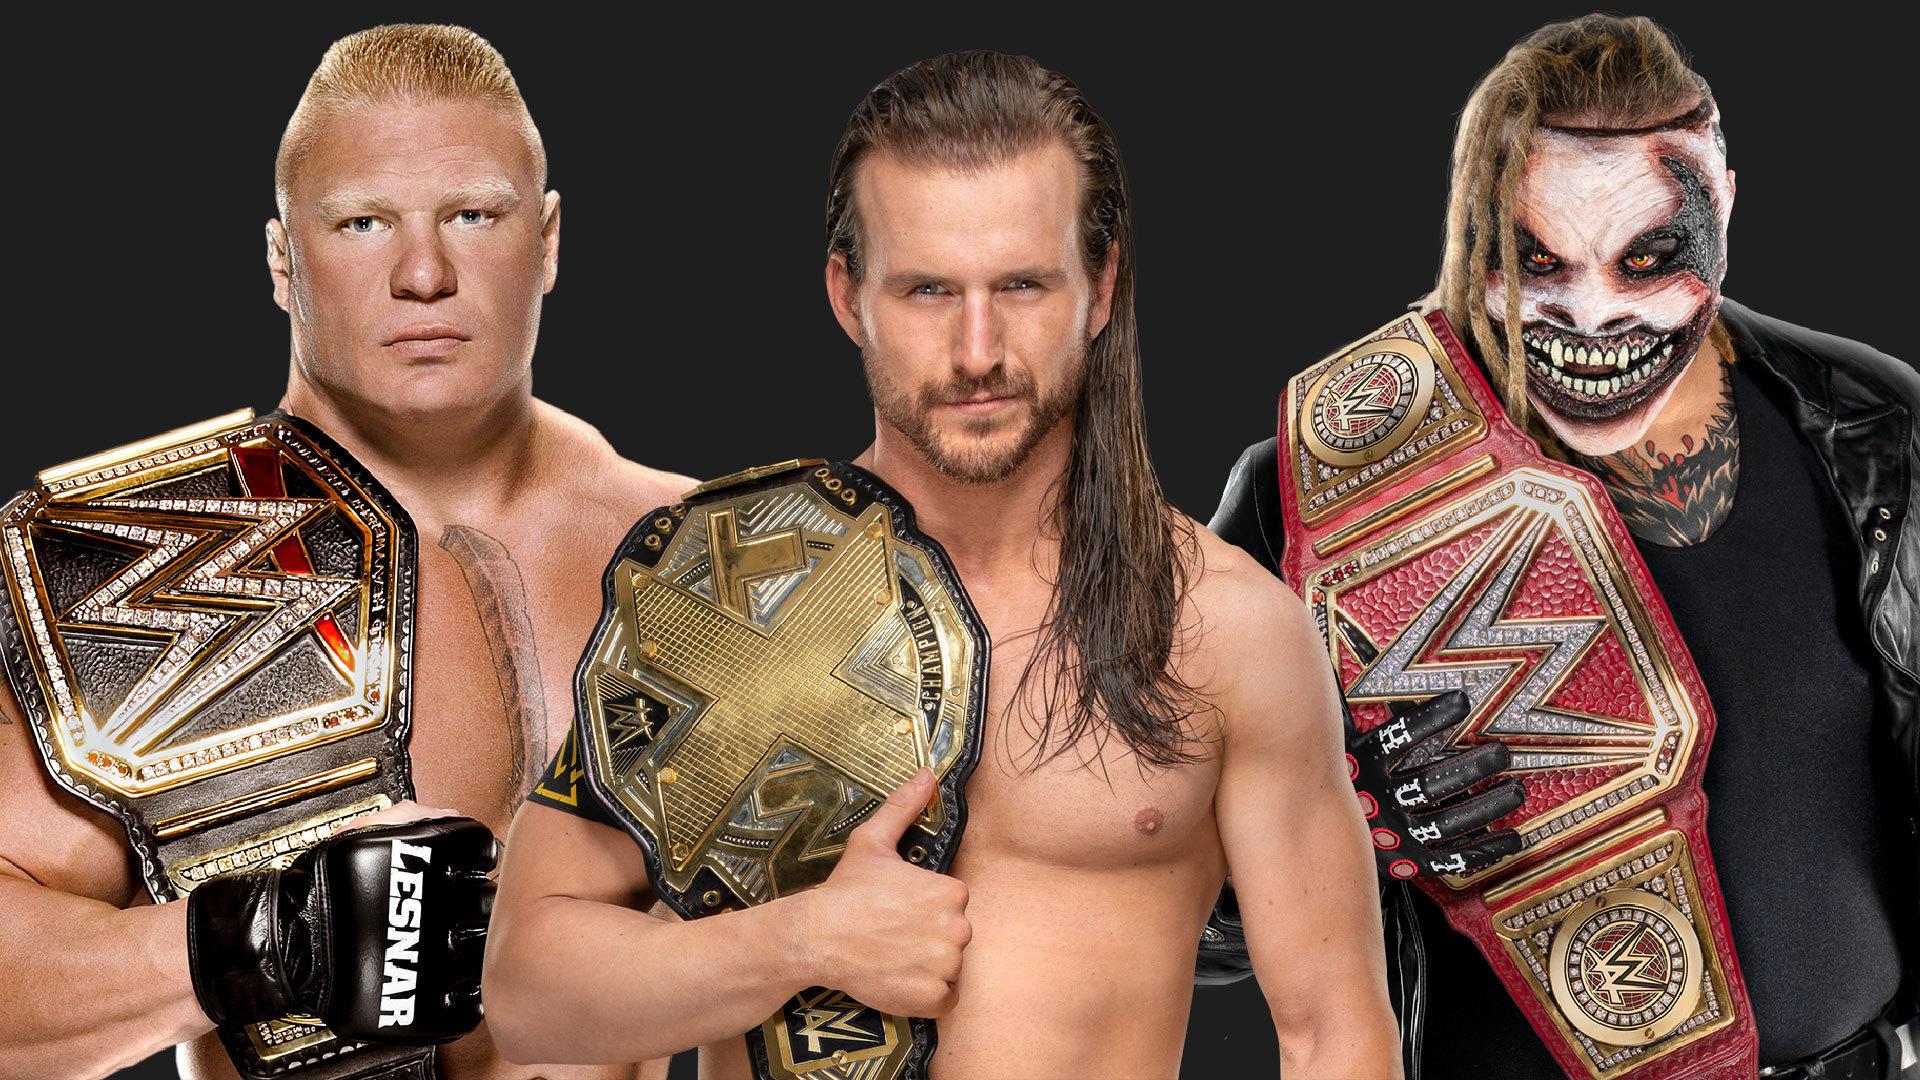 WWE Survivor Series 2019: Does Raw, SmackDown or NXT Have